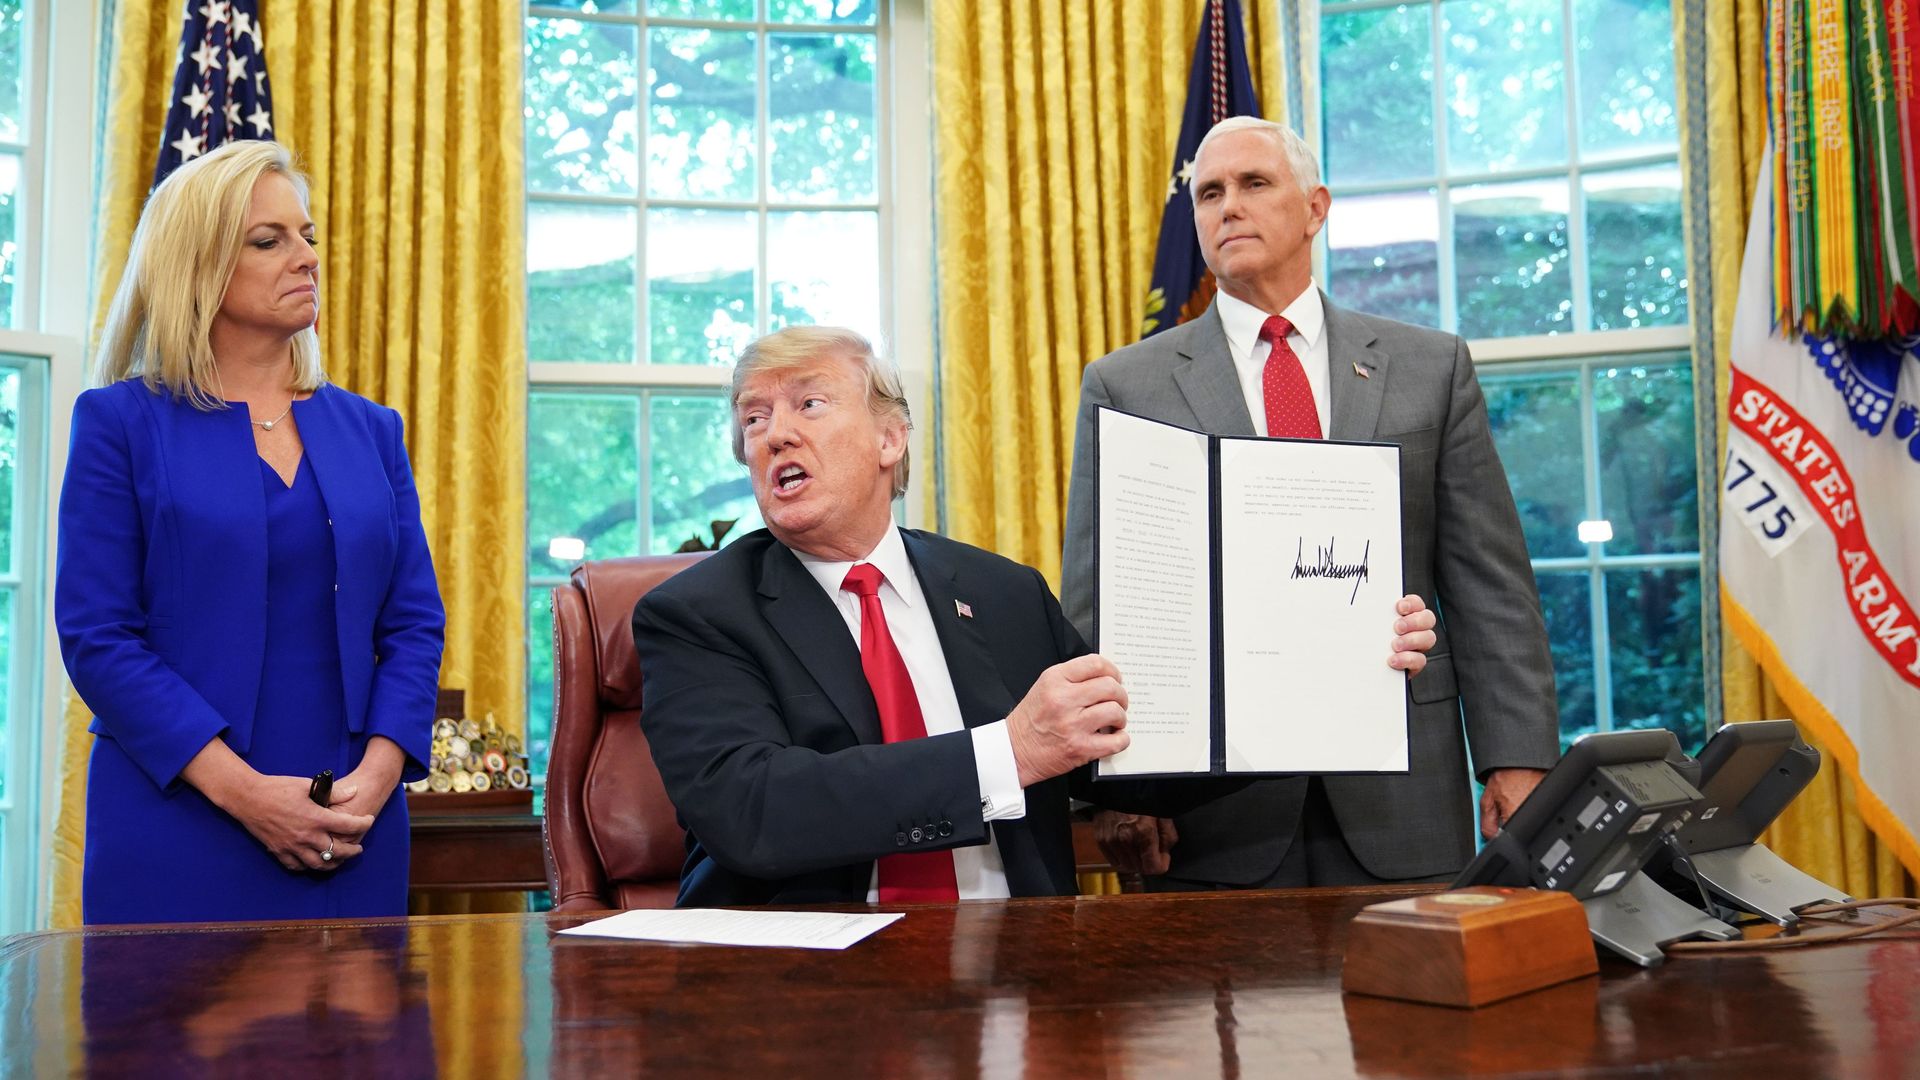 President Trump holding up a signed executive order on immigration